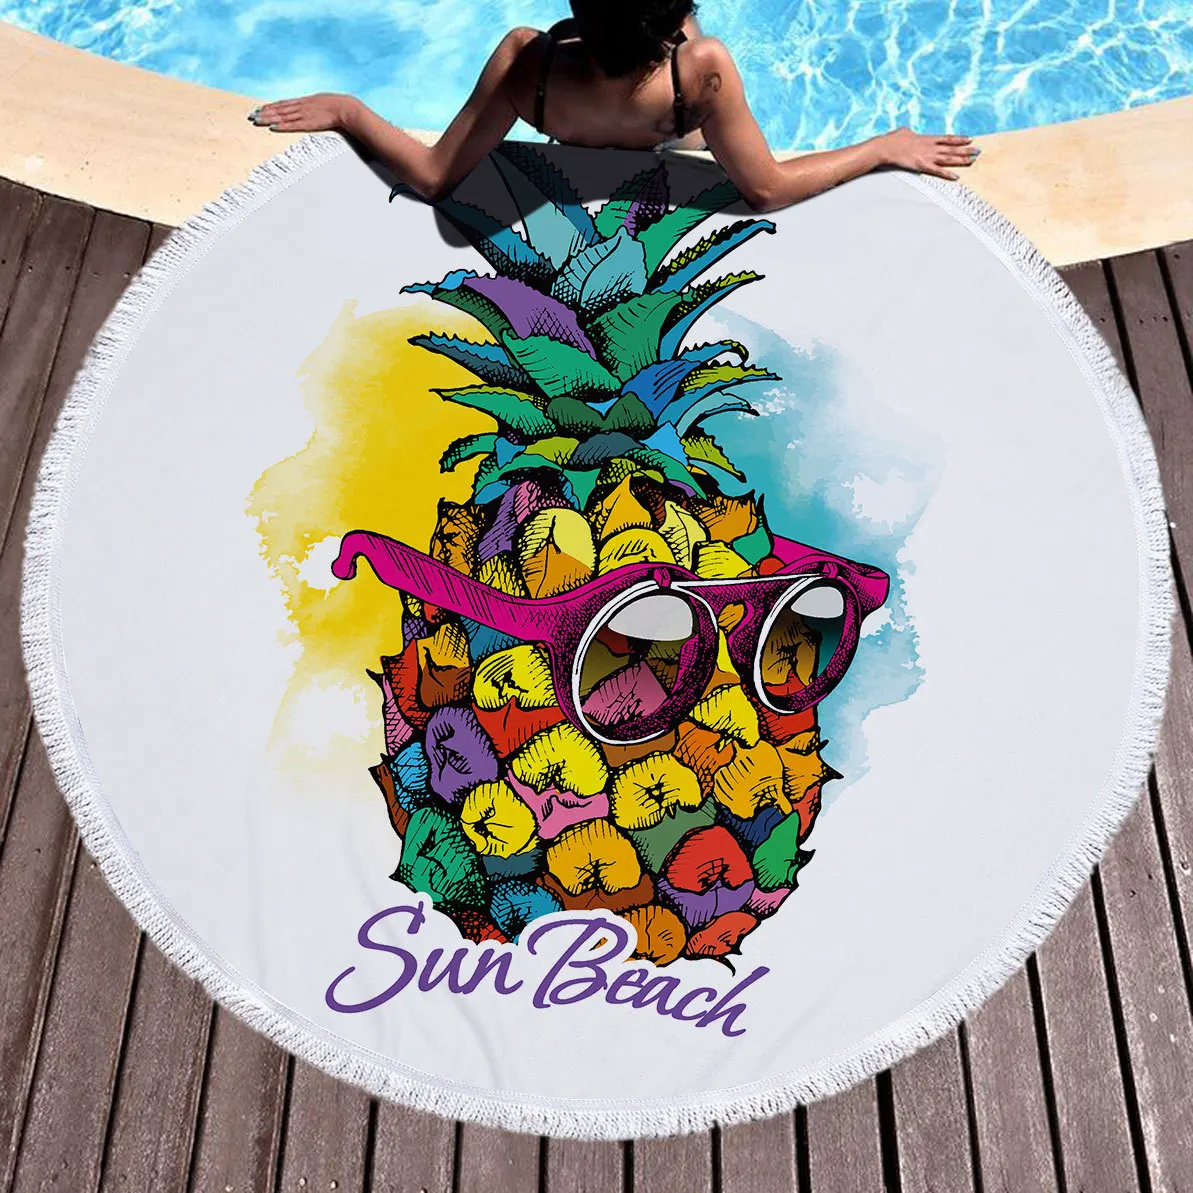 

Round Beach Towel Blanket Stripe Pineapples Microfiber Quick Dry Extra Large 60 Inches Roundie Towel Mat for Kids Women Girls Me